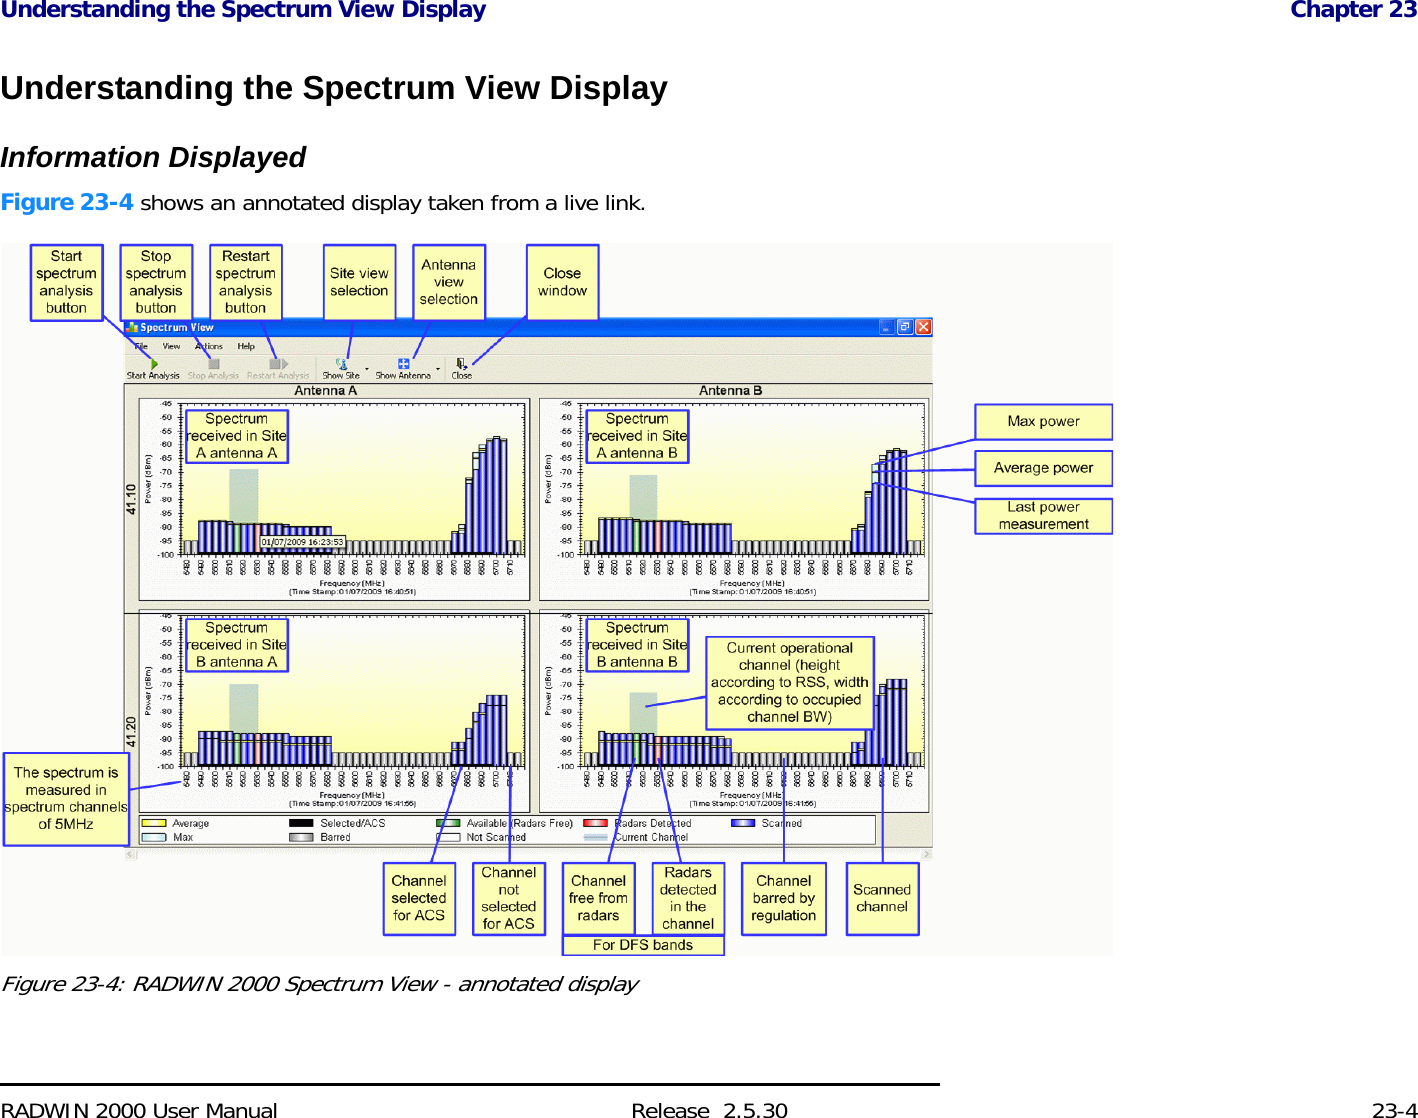 Understanding the Spectrum View Display Chapter 23RADWIN 2000 User Manual Release  2.5.30 23-4Understanding the Spectrum View DisplayInformation DisplayedFigure 23-4 shows an annotated display taken from a live link.Figure 23-4: RADWIN 2000 Spectrum View - annotated display